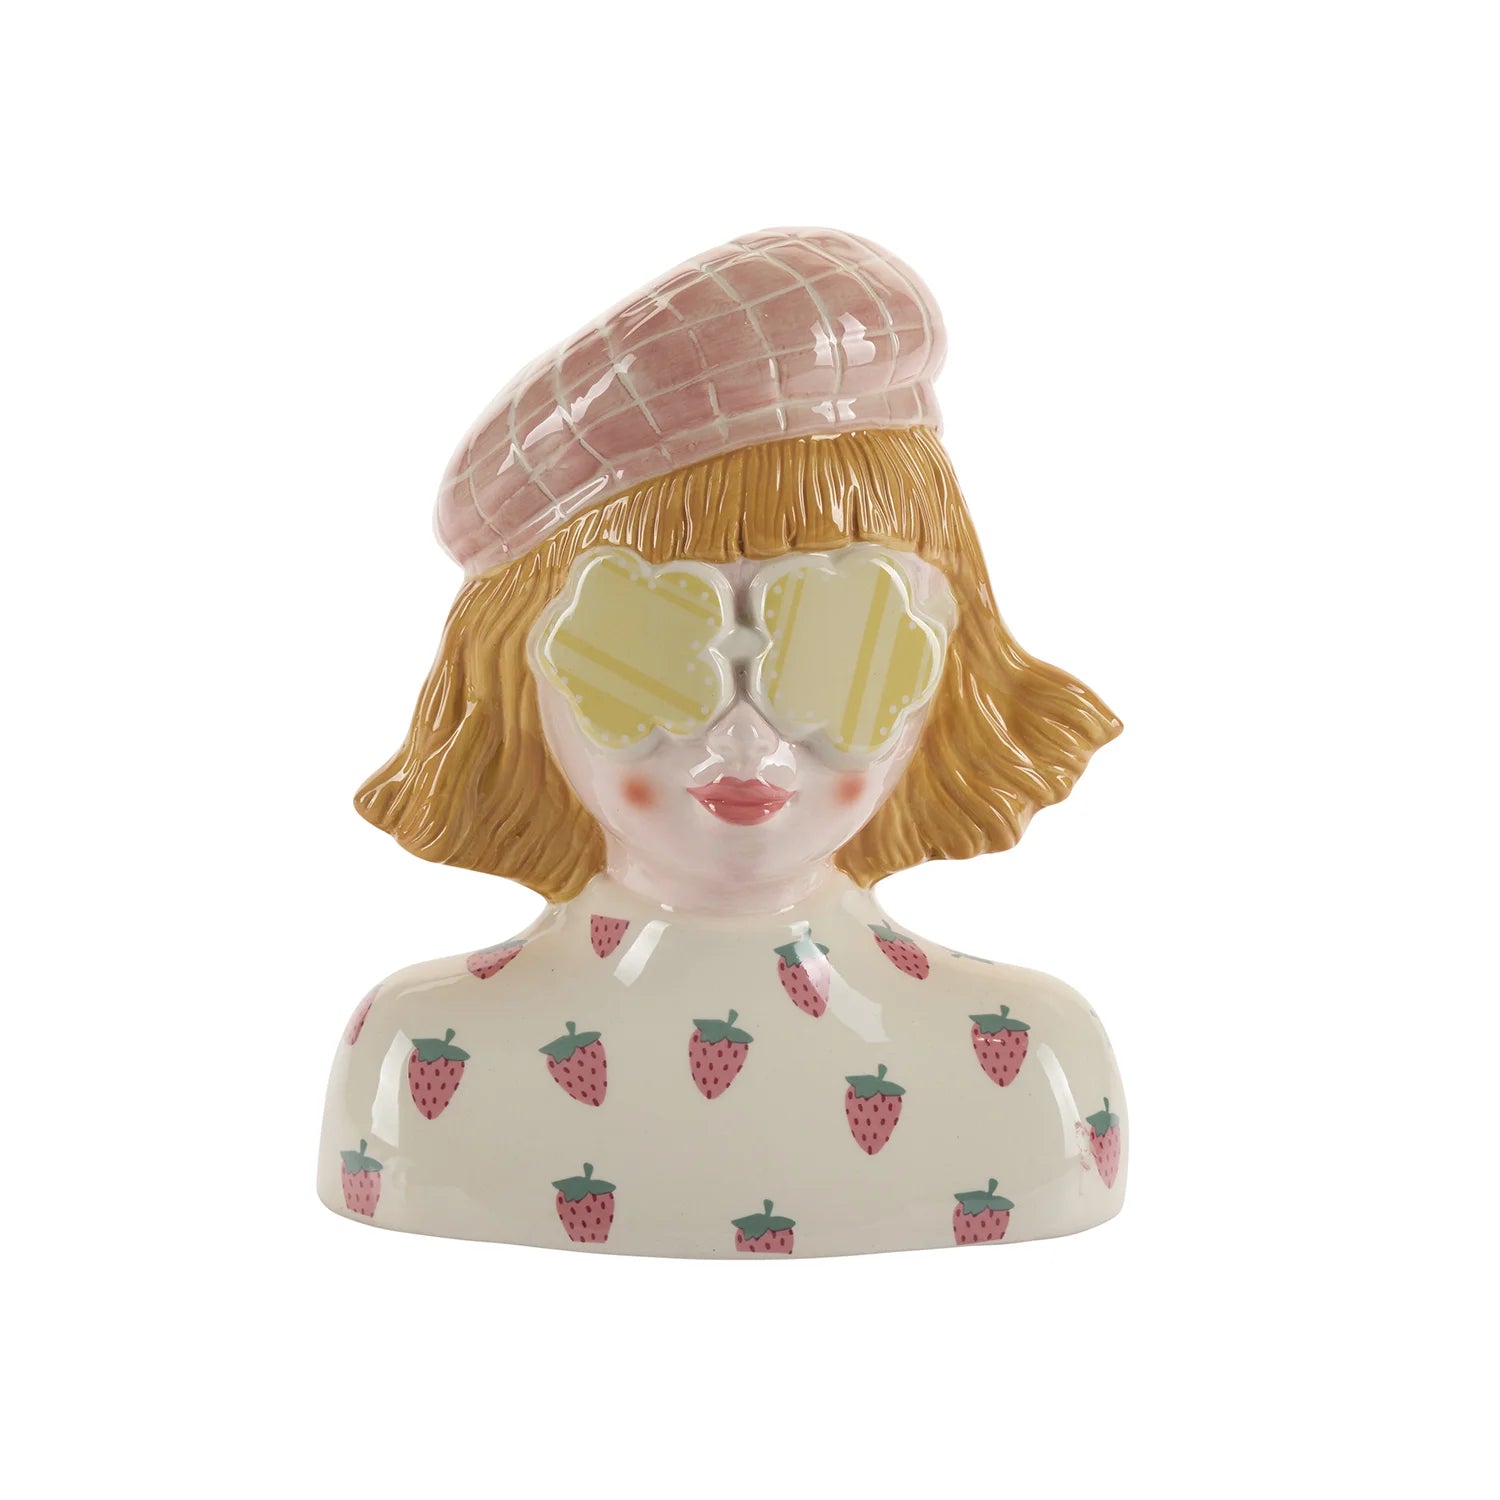 BAHNE & CO | FLOWER POT LADY WITH SUNGLASSES AND HAT